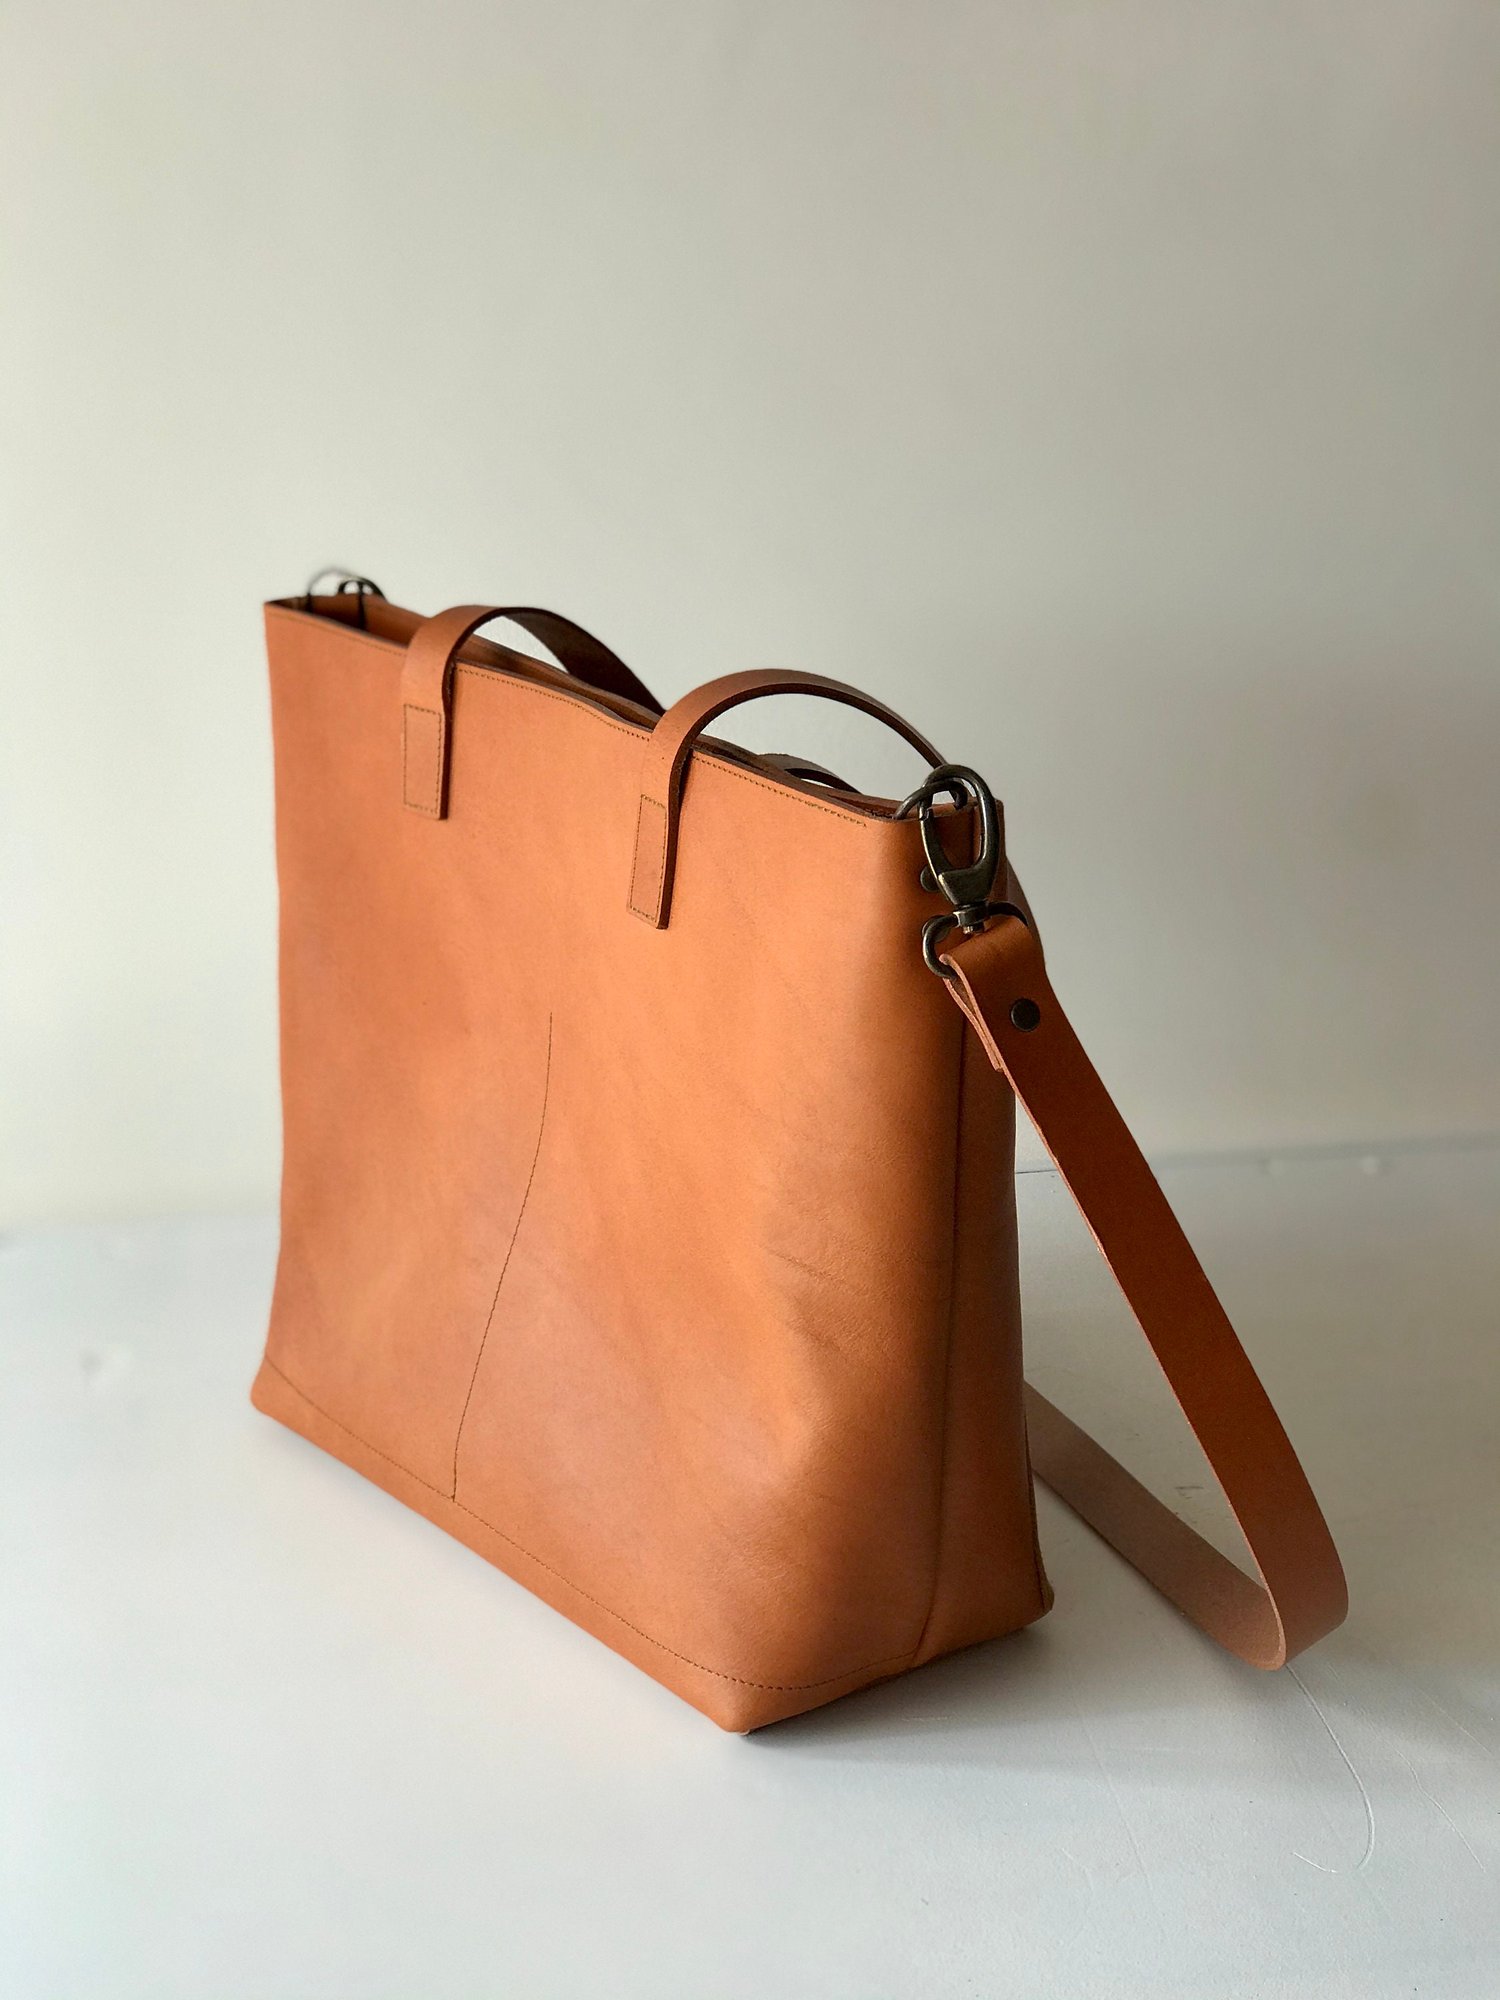 Mini Cap Sa Sal Bag. Small Crossbody bag in Cognac /Tan Leather with  outside pocket and Zipper. (Copy) — Vermut Atelier